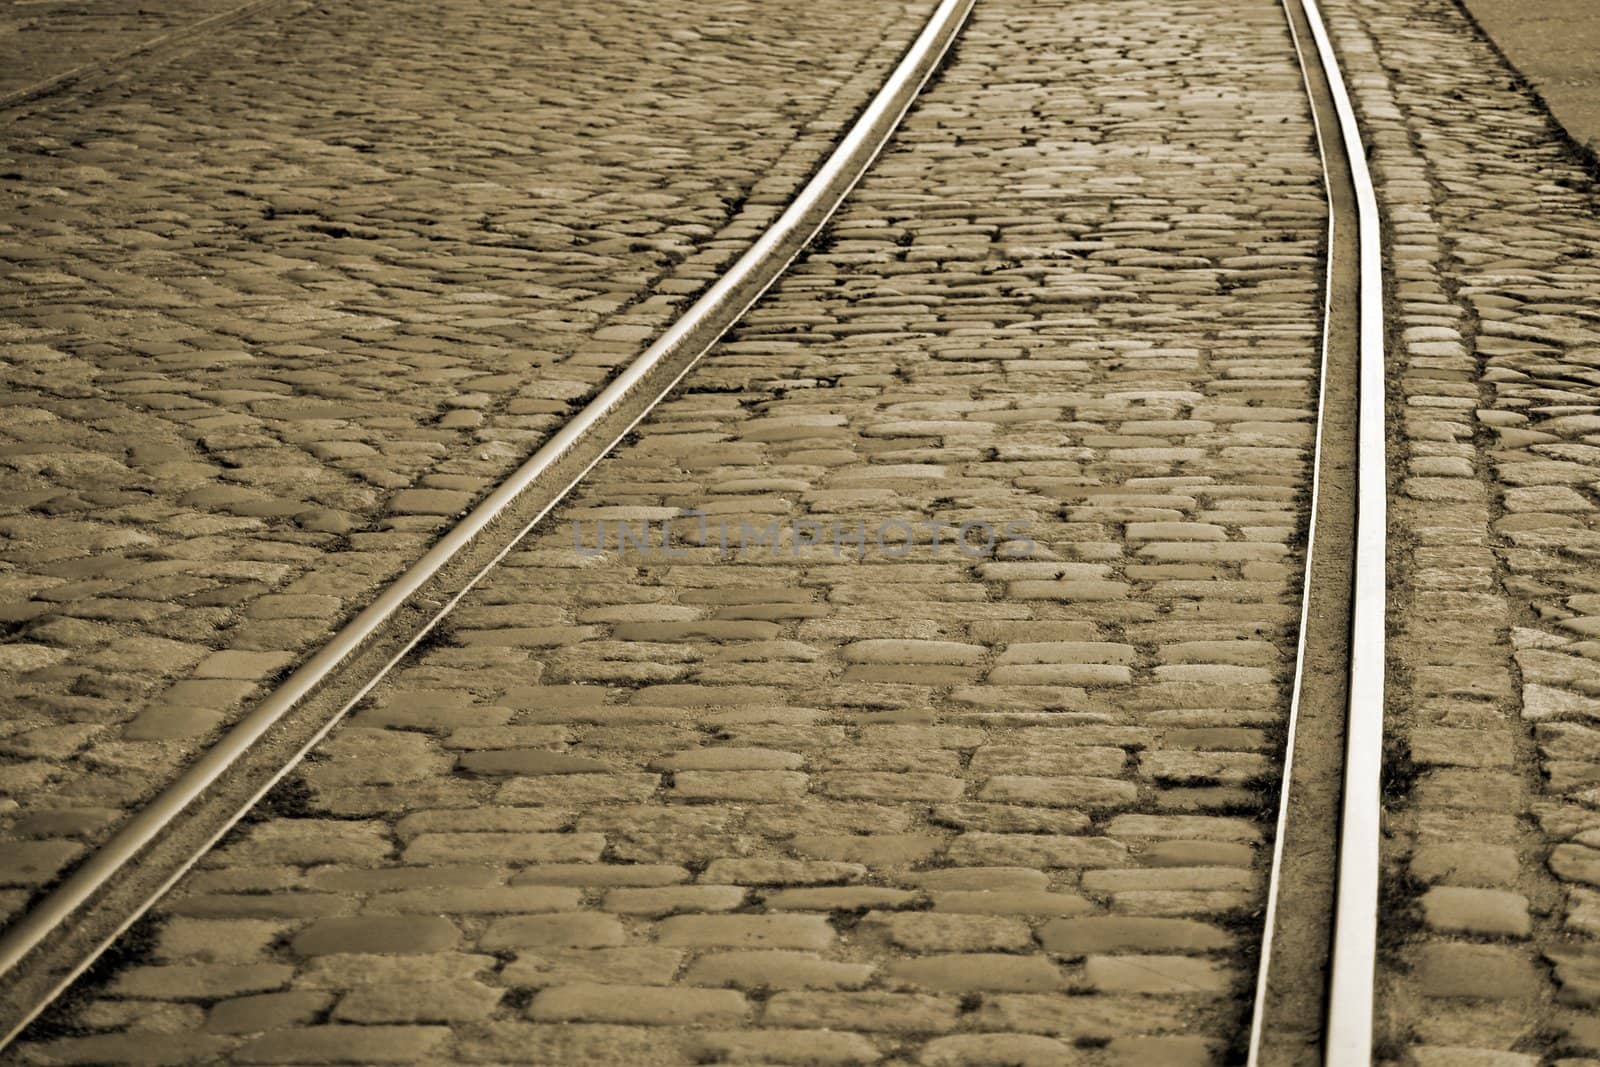 Railtracks in a very old cobblestone road in an abandoned industrial area. Sepia toned.